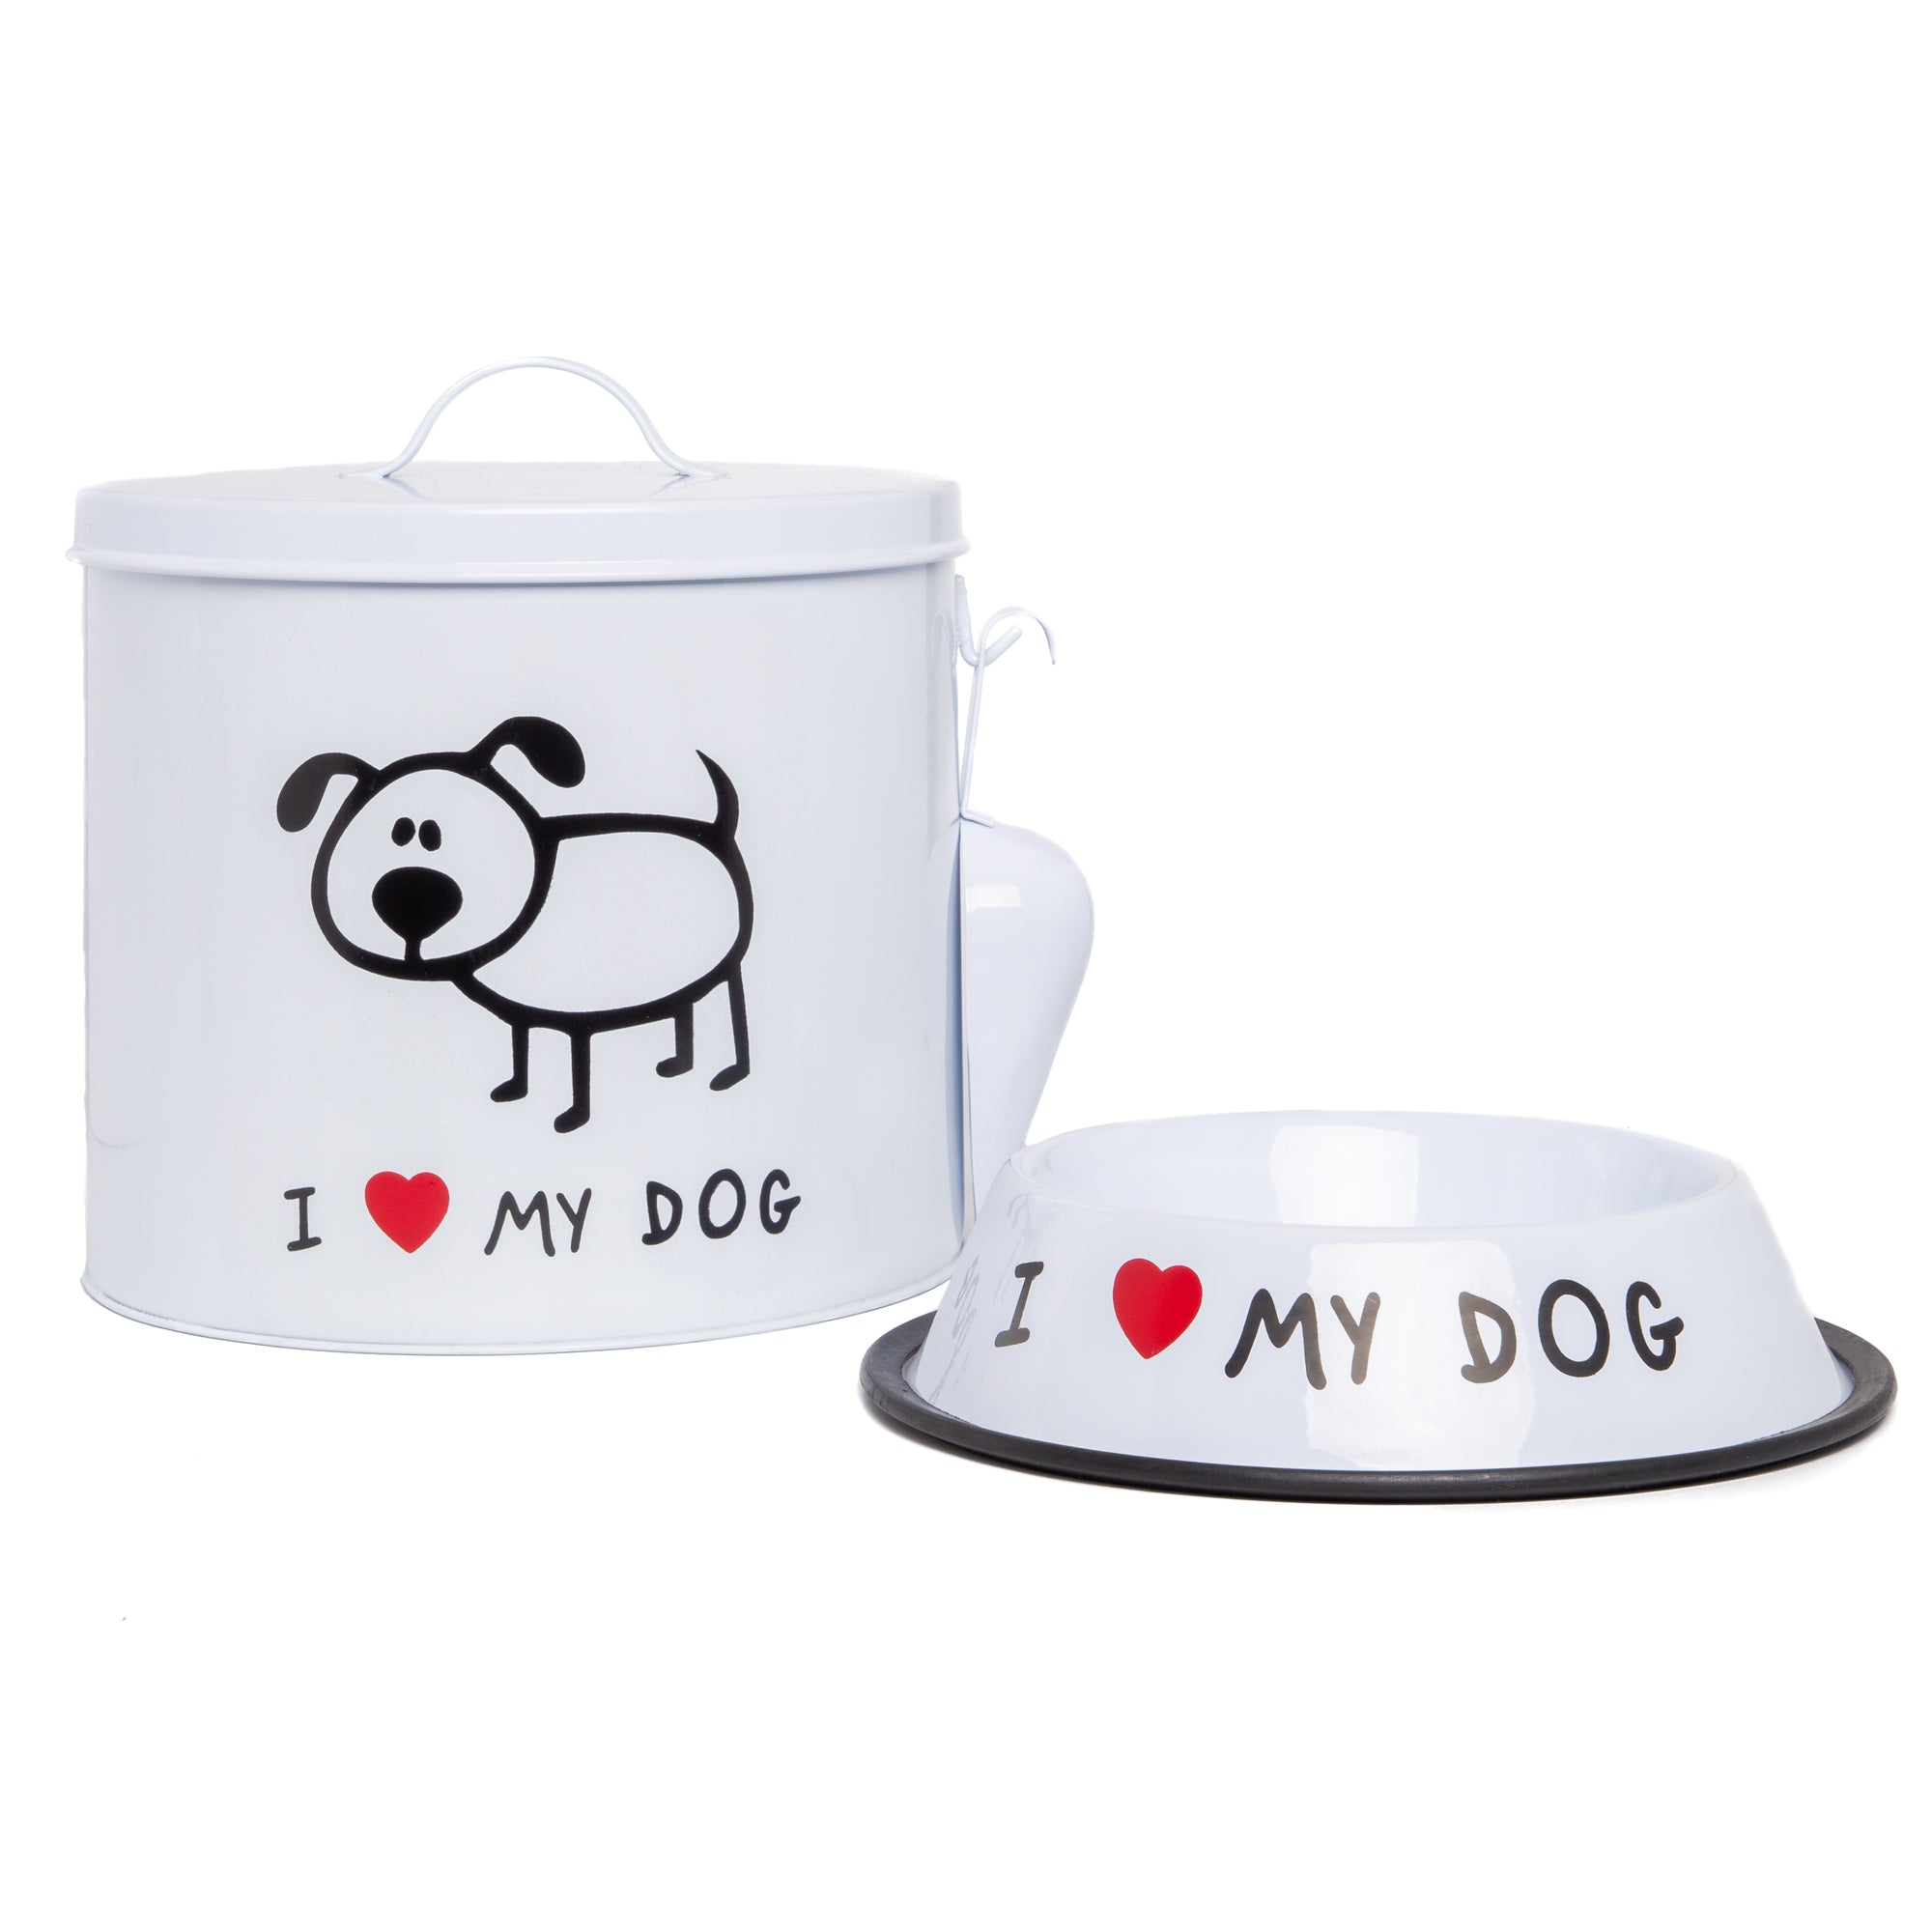 The PetSteel White I Love Dog: Decorative Canister with Bowl and Scoop | Pet Food and Treat Container Storage Set | Airtight Lids | Fit's Up to 10 lbs of Treats or Food | Pet Treat Jar (PGSTN-03D)